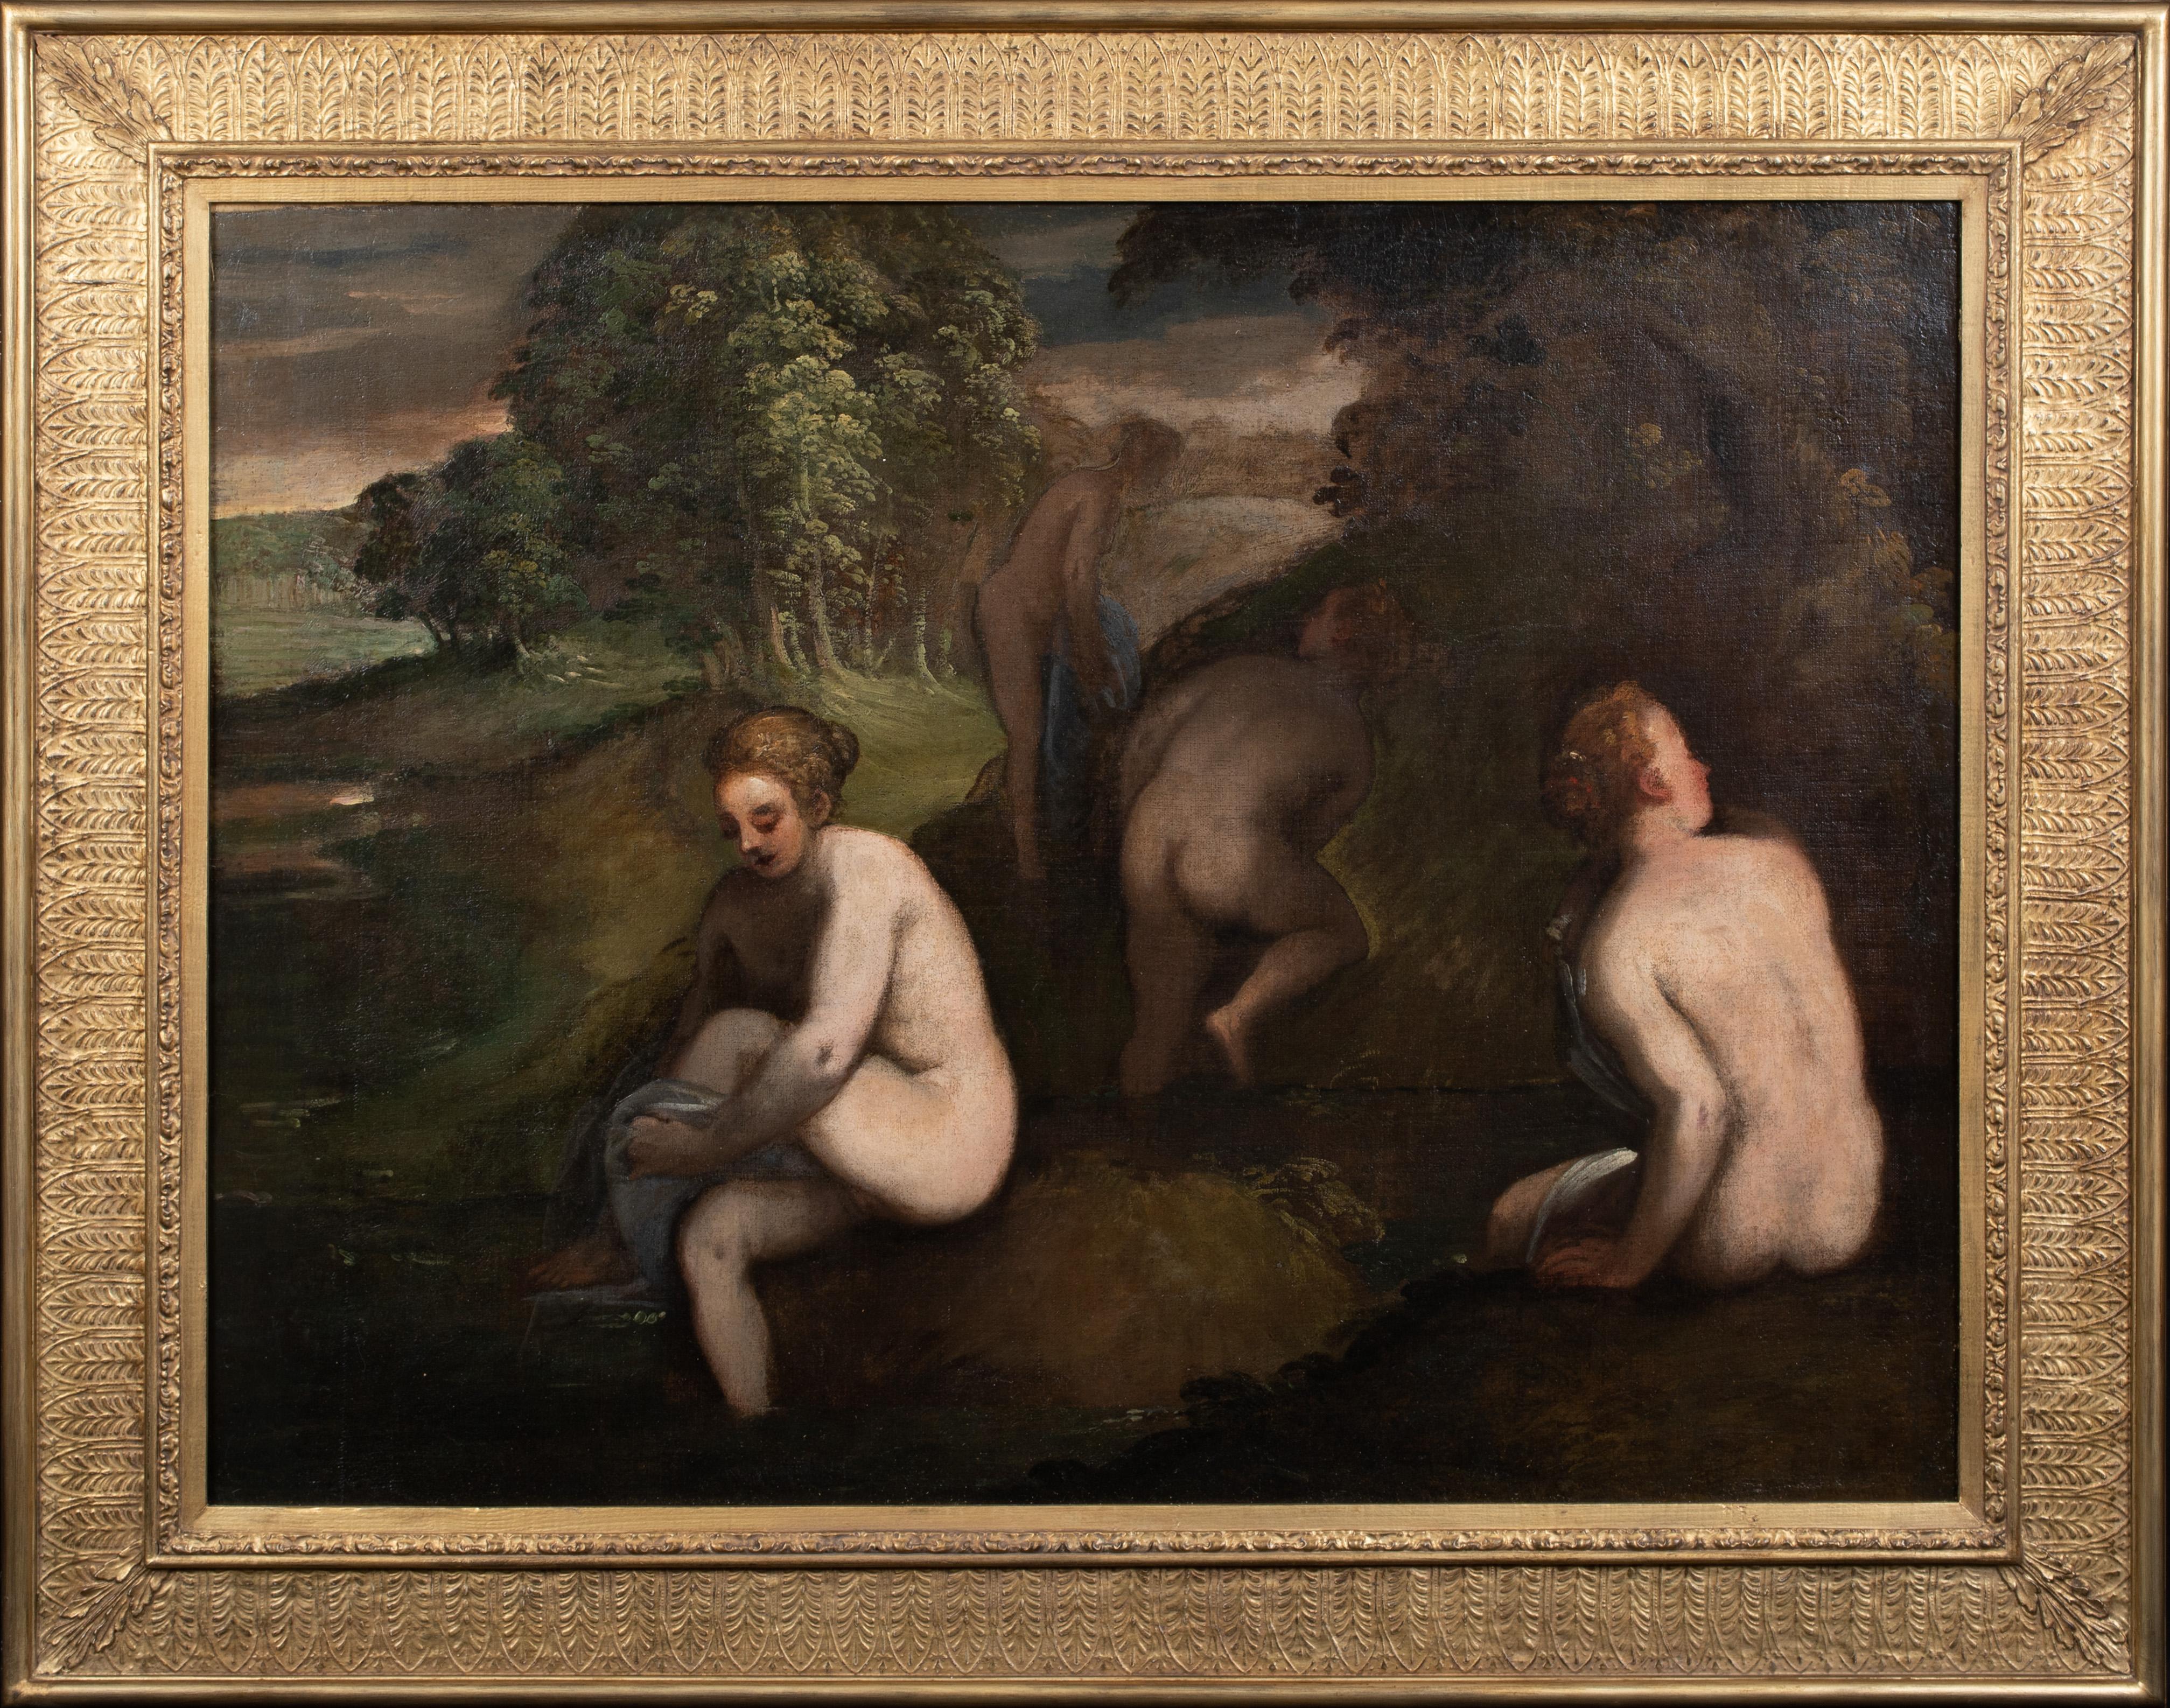 Unknown Portrait Painting - Nudes Bathing in A Landscape, 16th/17th Century